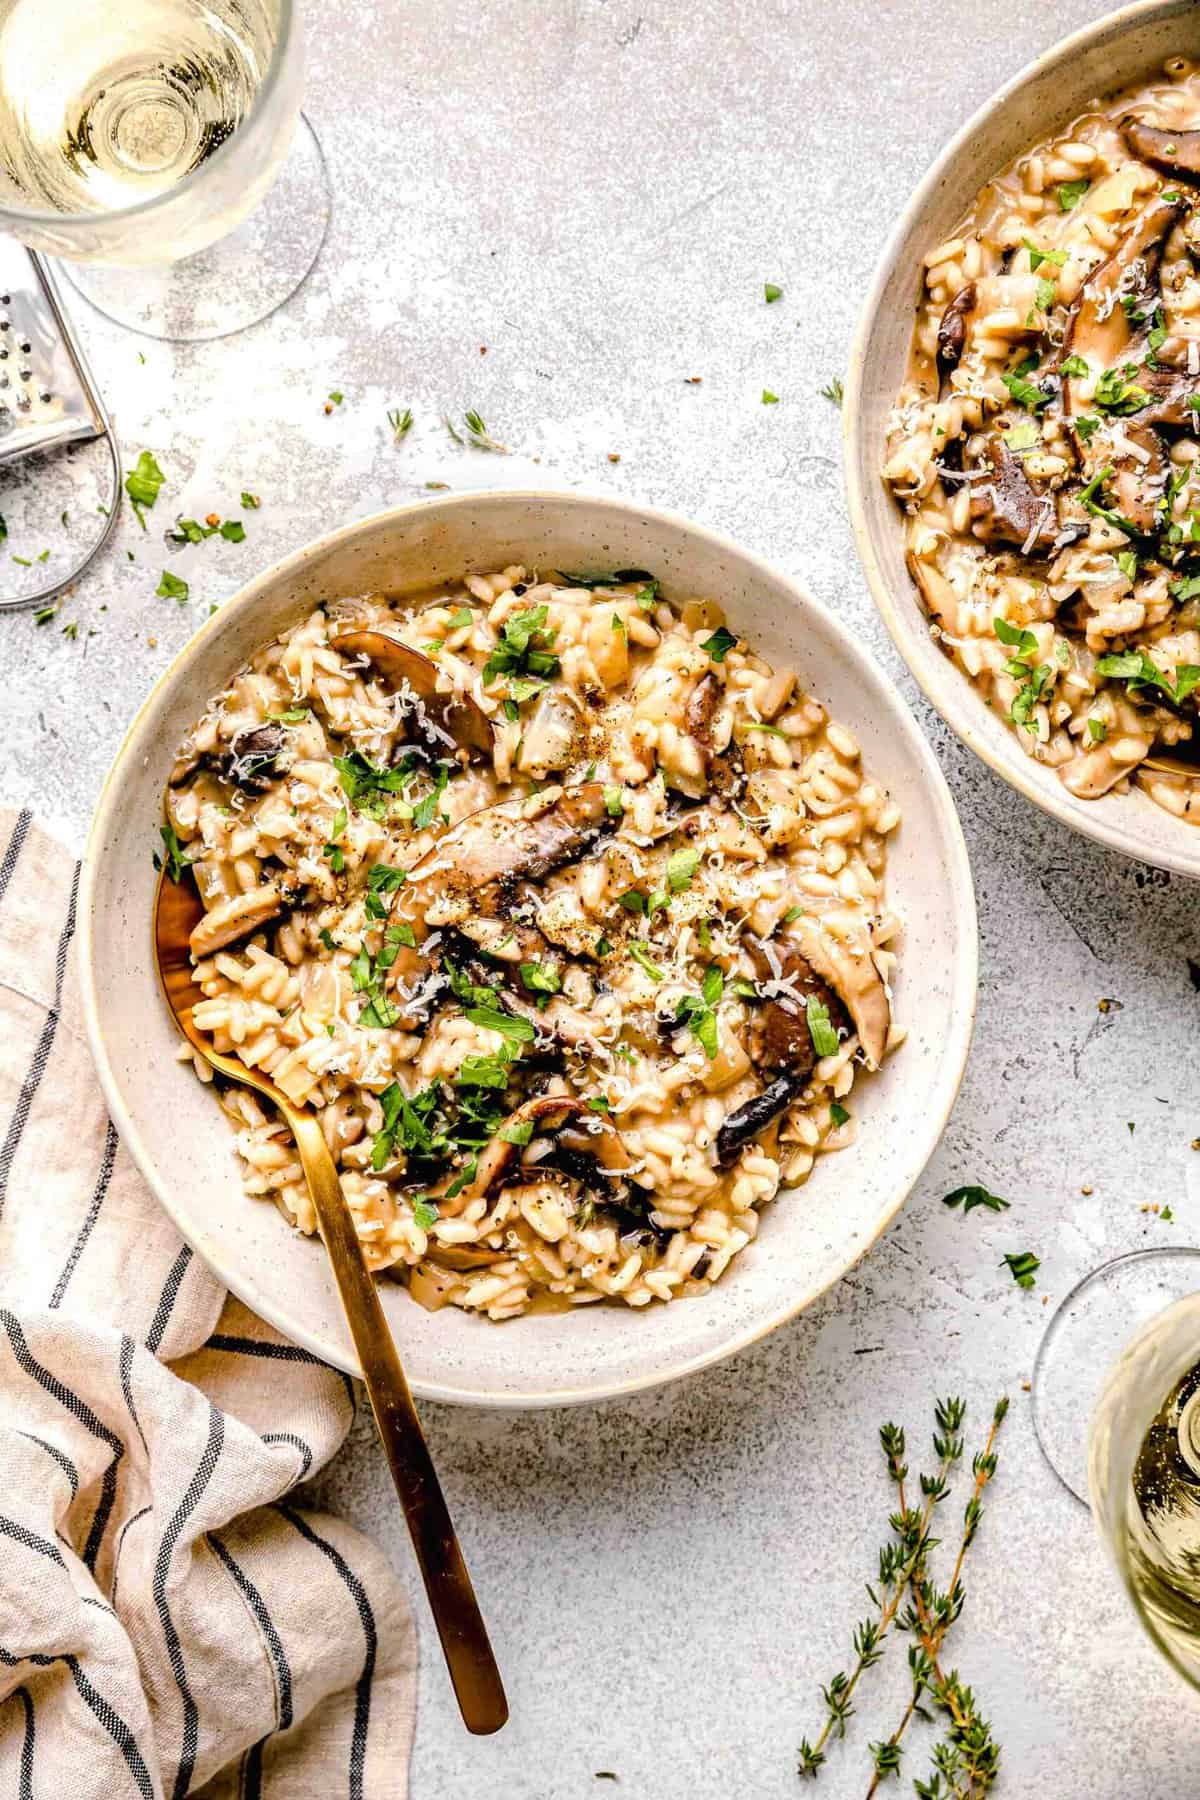 Mushroom risotto in dinner bowls with a spoon next to a glass of white wine and garnished with fresh parsley.